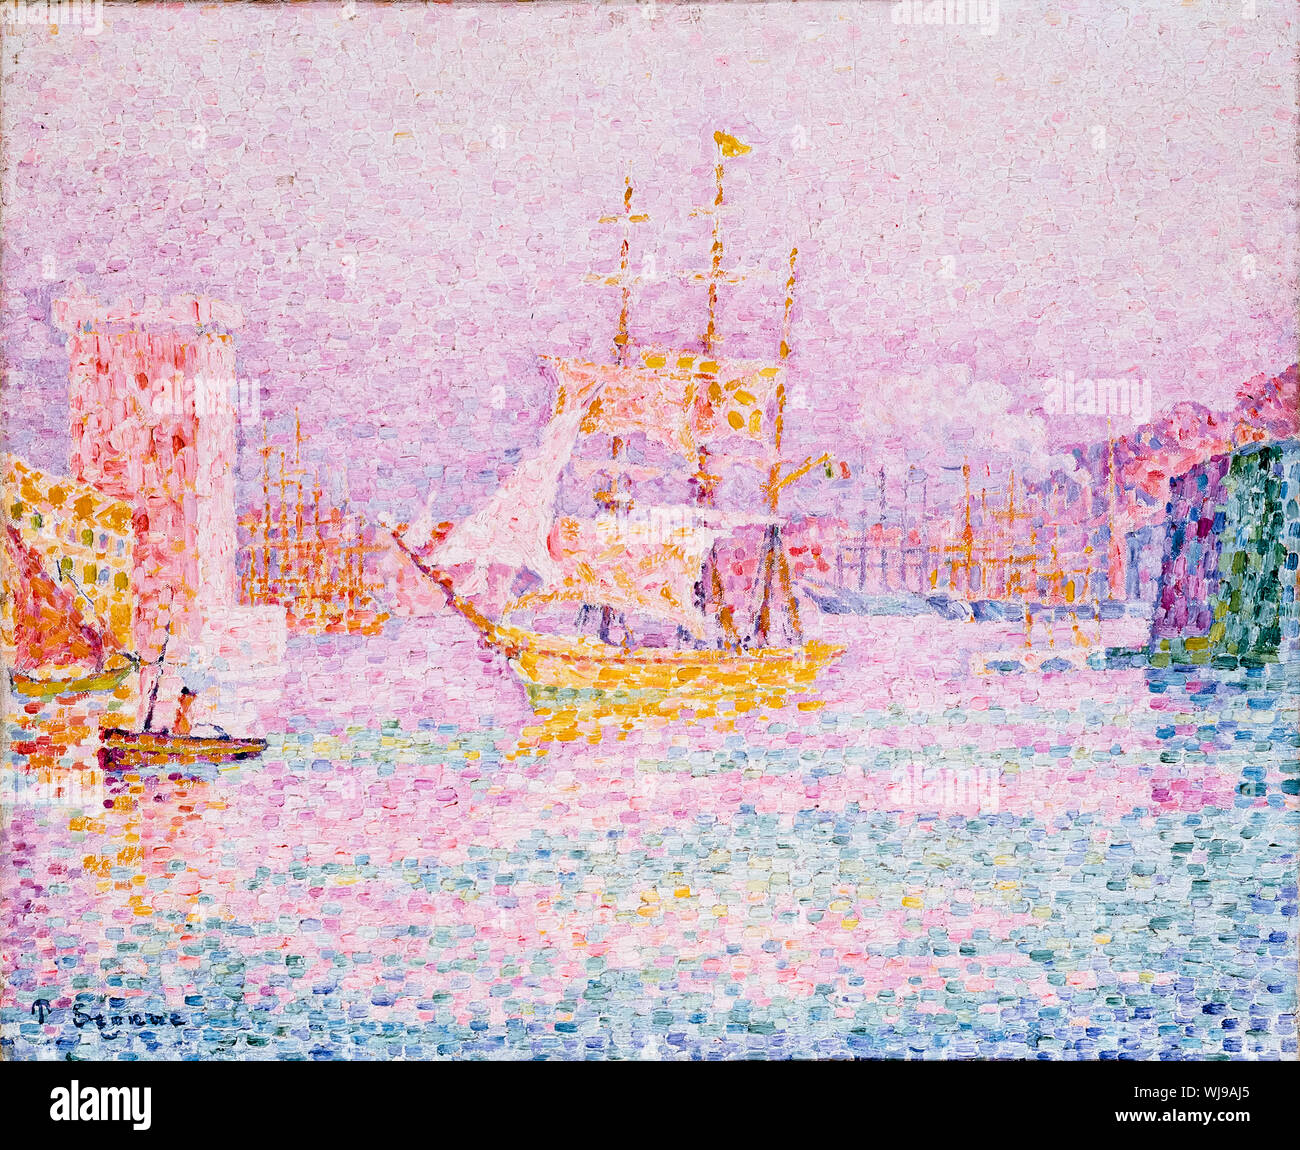 Paul Signac, The Harbour at Marseilles, painting, 1907 Stock Photo